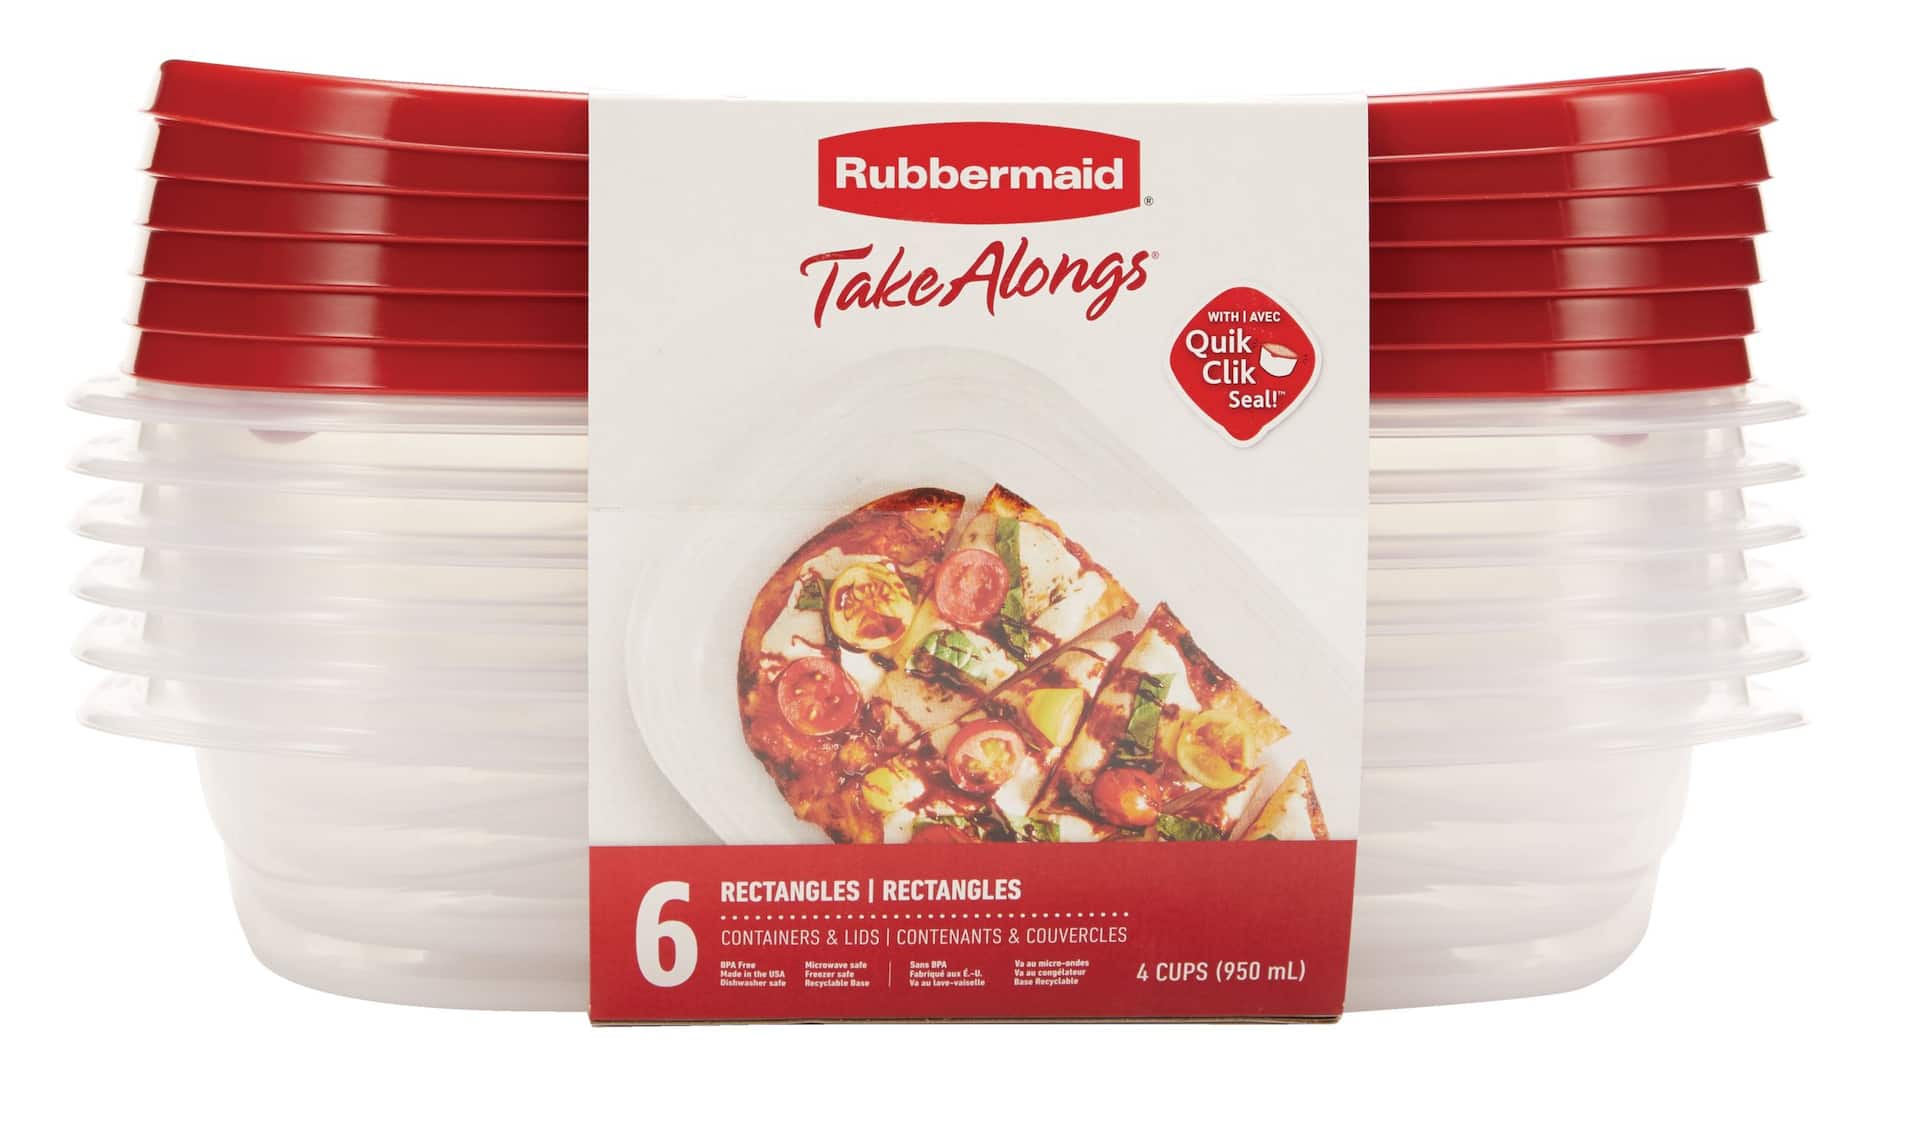 https://media-www.canadiantire.ca/product/living/home-essentials/household-consumables/1531233/rubbermaid-take-alongs-rectangle-container-946ml-6-count-9062ff59-8f06-419b-beba-3b0bcb5c4646-jpgrendition.jpg